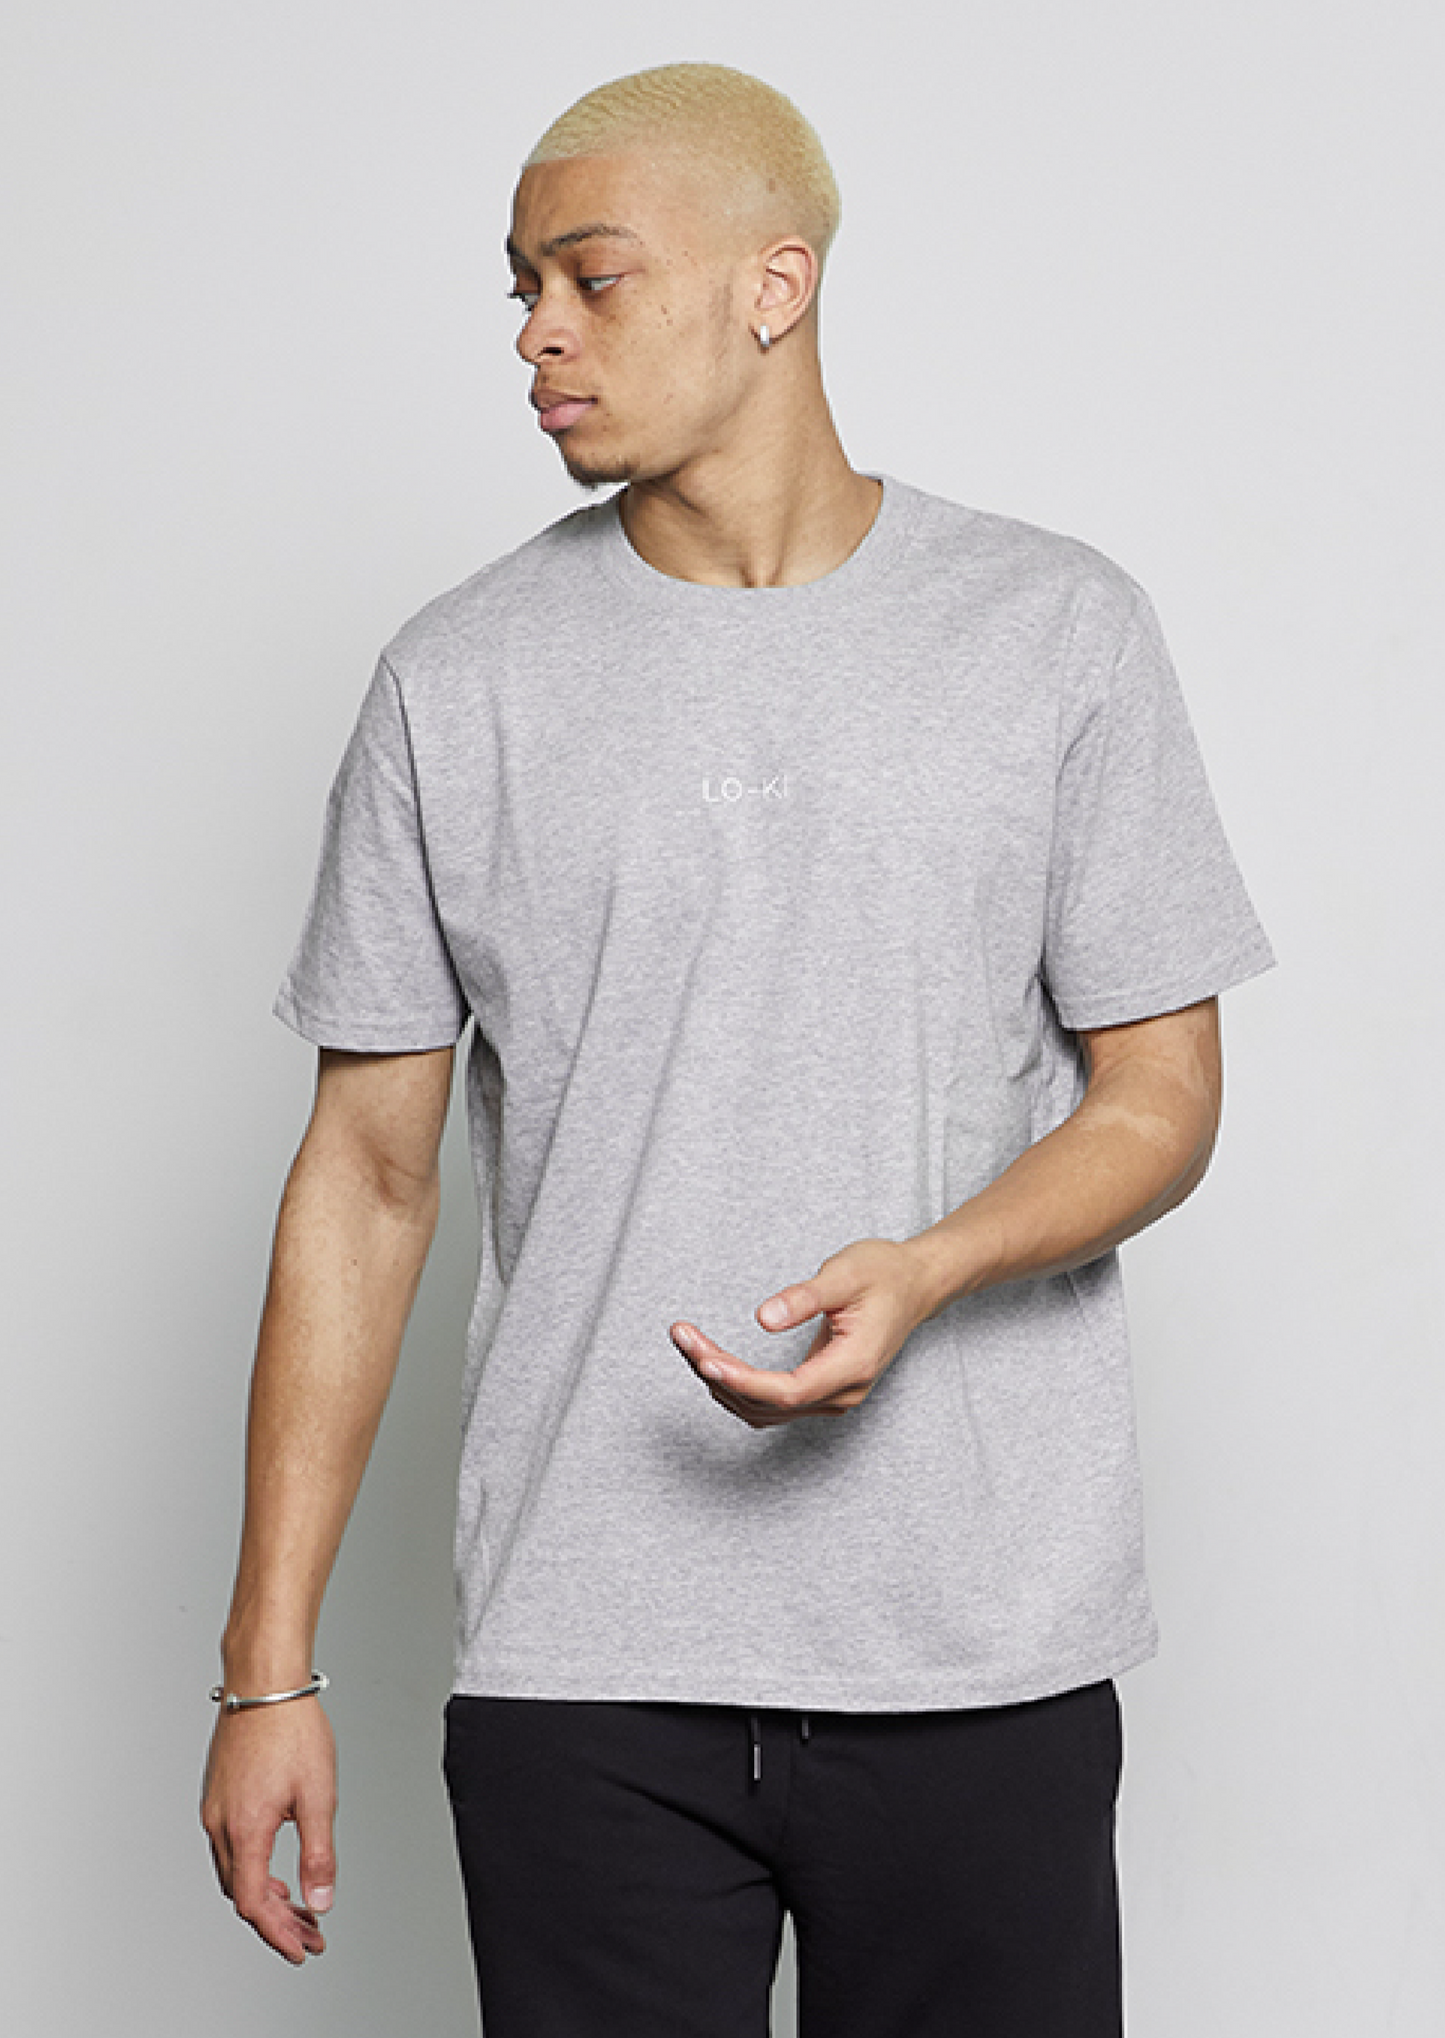 EMBROIDERED T-SHIRT IN GREY